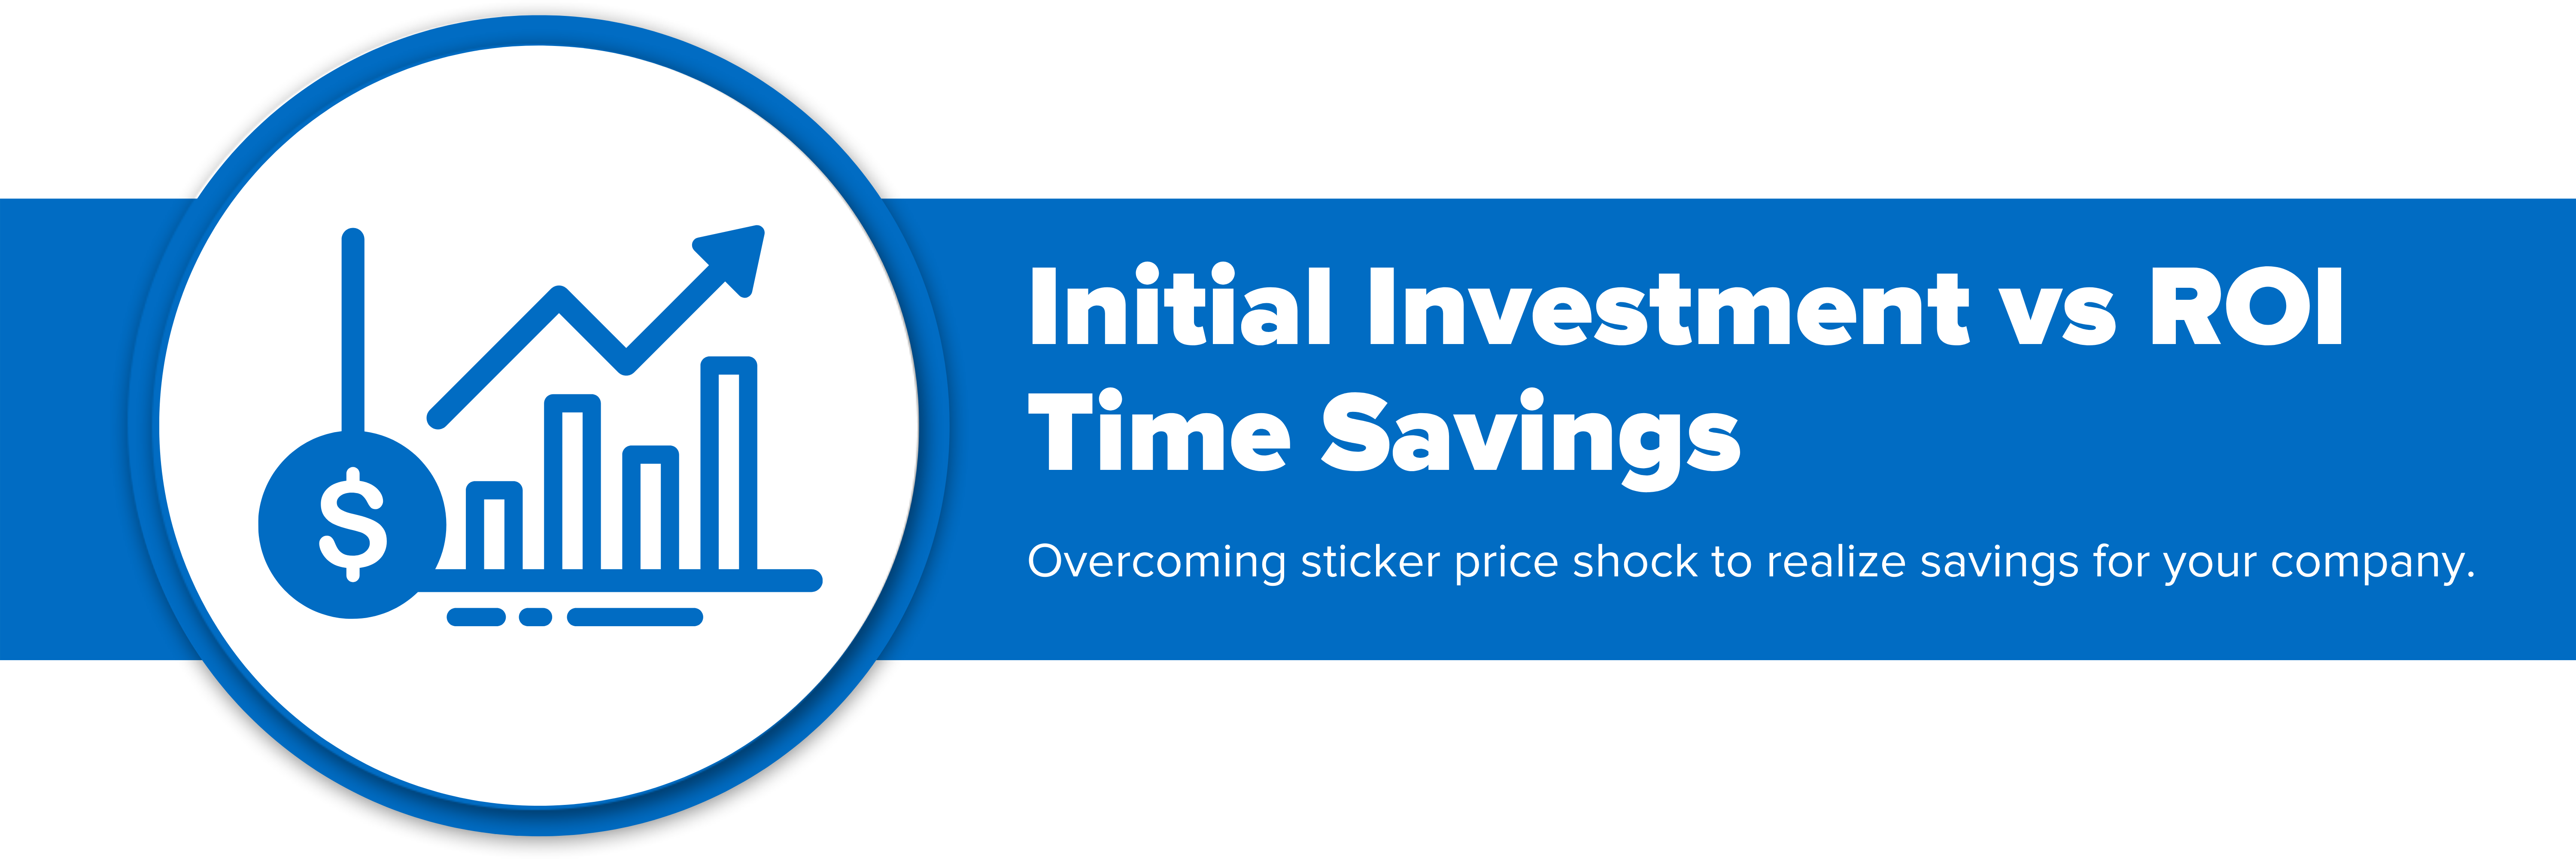 Header image with text "Initial Investment vs. ROI Time Savings"